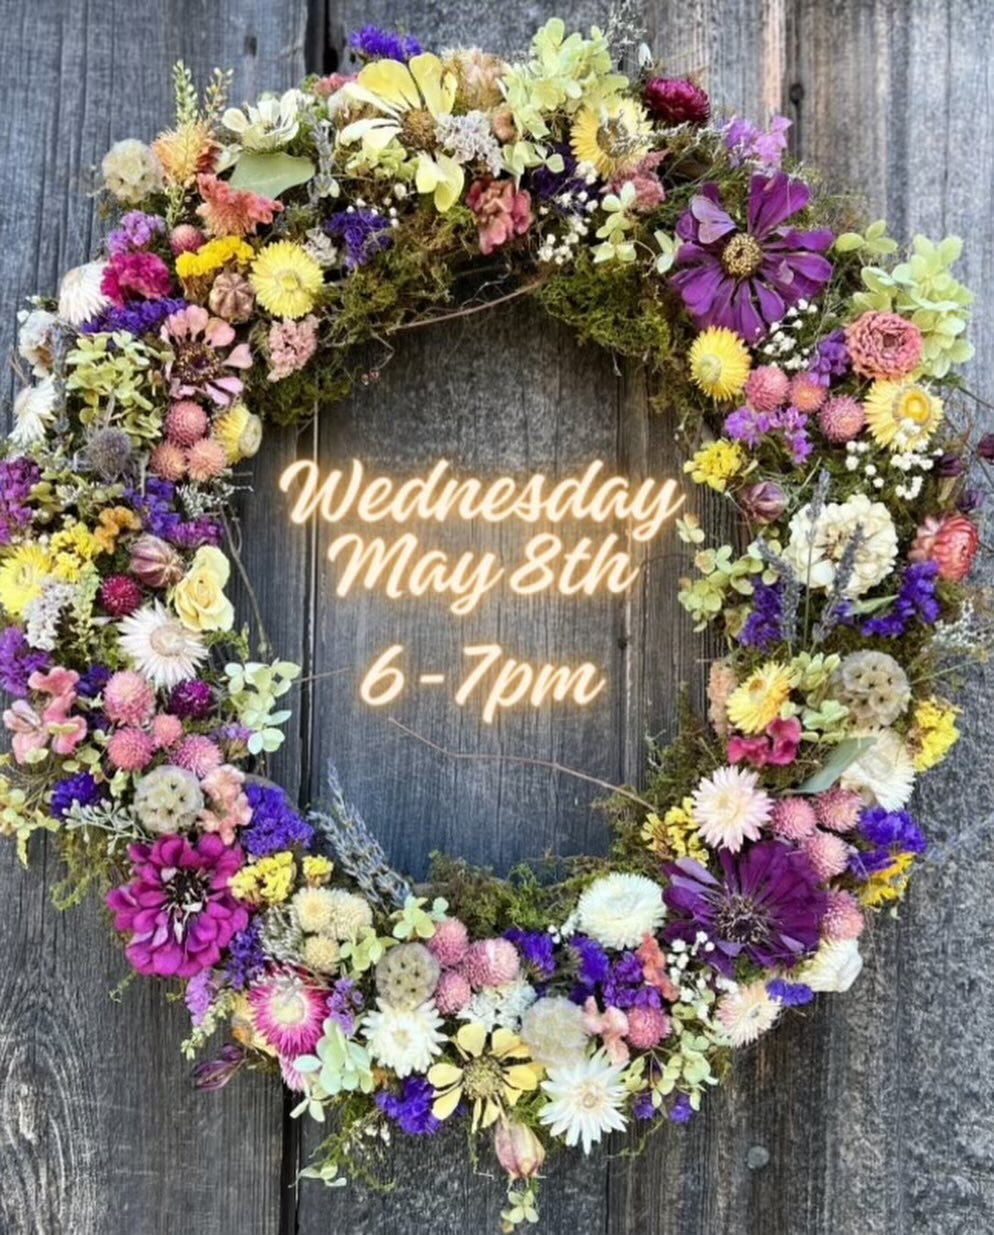 Join me TONIGHT with my friends at Splurge @splurgehomestore for a fun demo and discussion about dried florals! I will be sharing about how we grow, dry and use our materials. These aren&rsquo;t your grandmother&rsquo;s dried flowers, for sure!!!

Pe